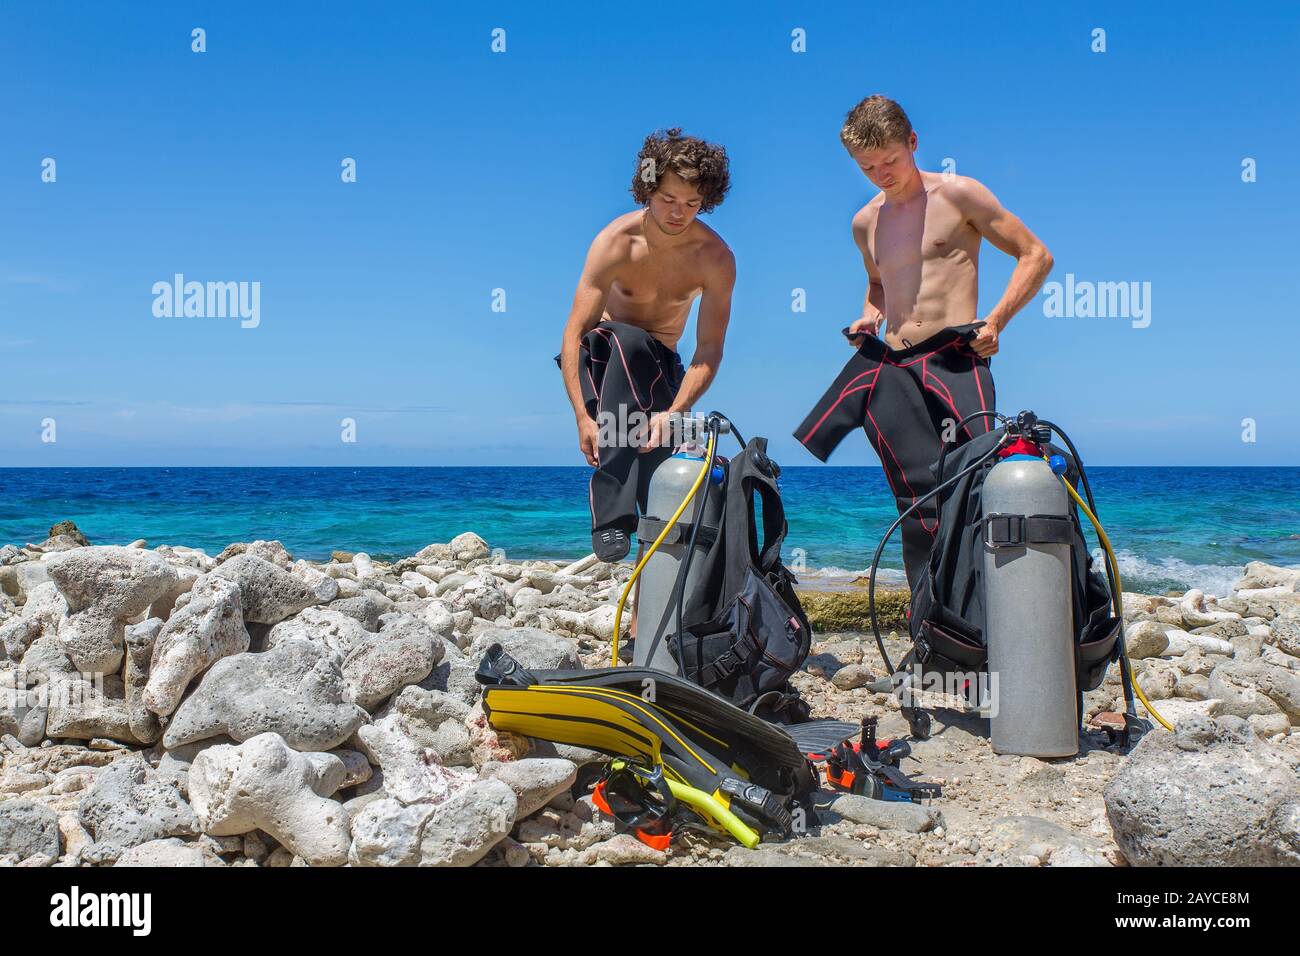 Two divers change clothes at the beach Stock Photo